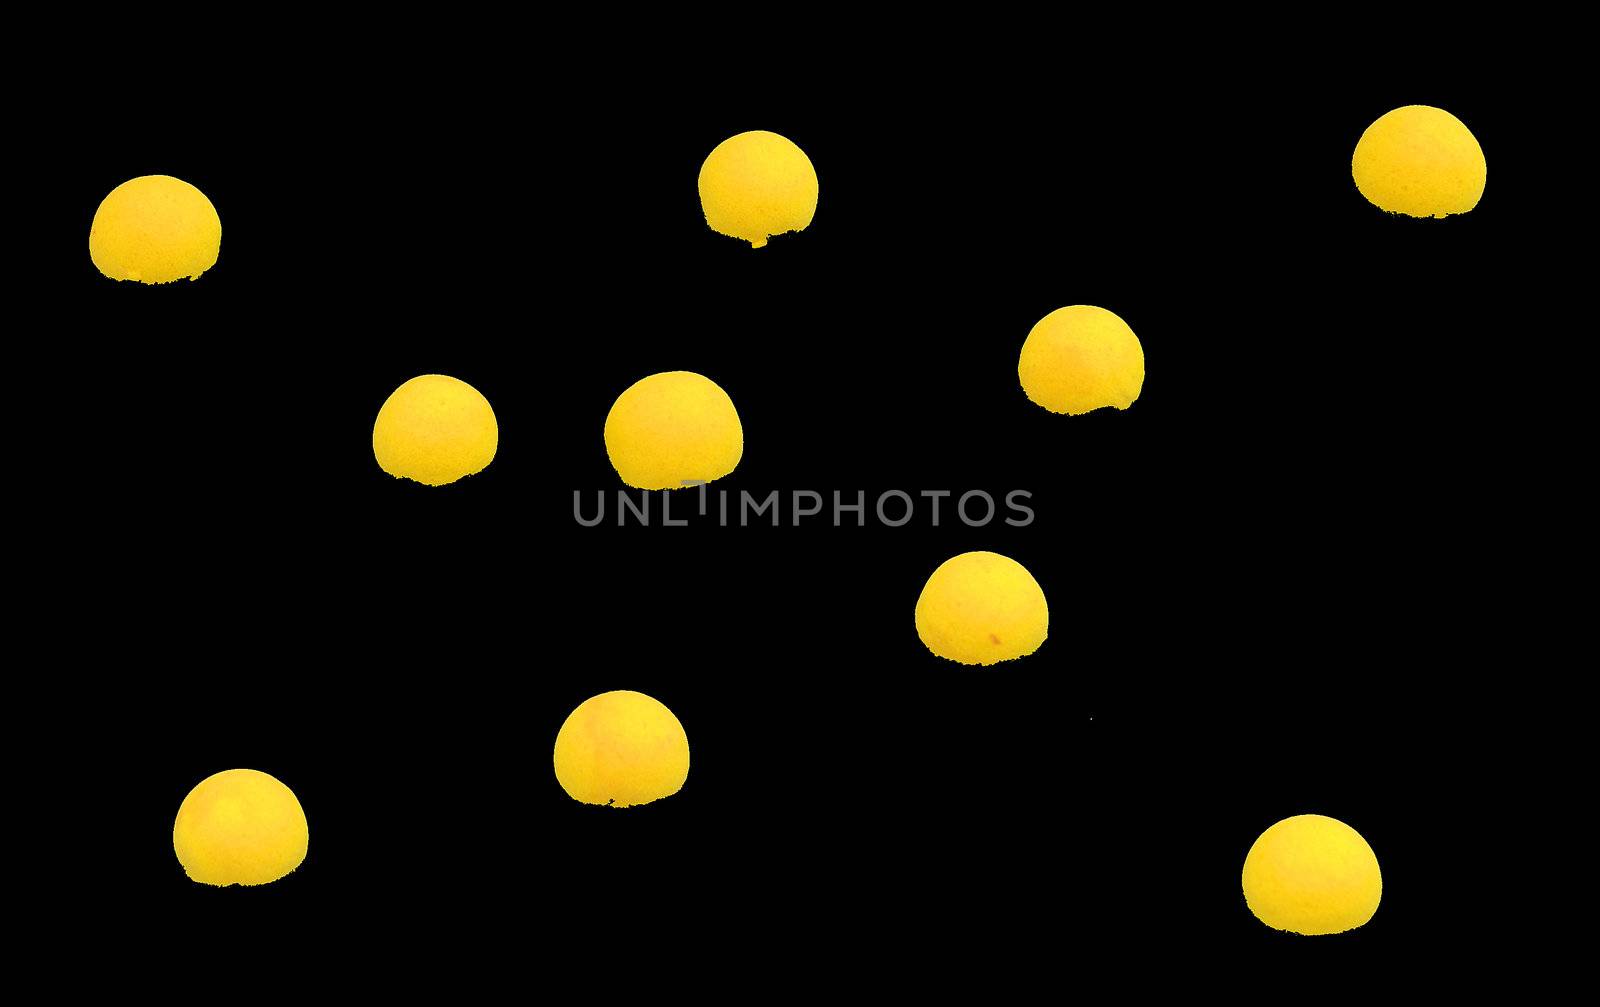 Mysterious yellow spheres by pauws99